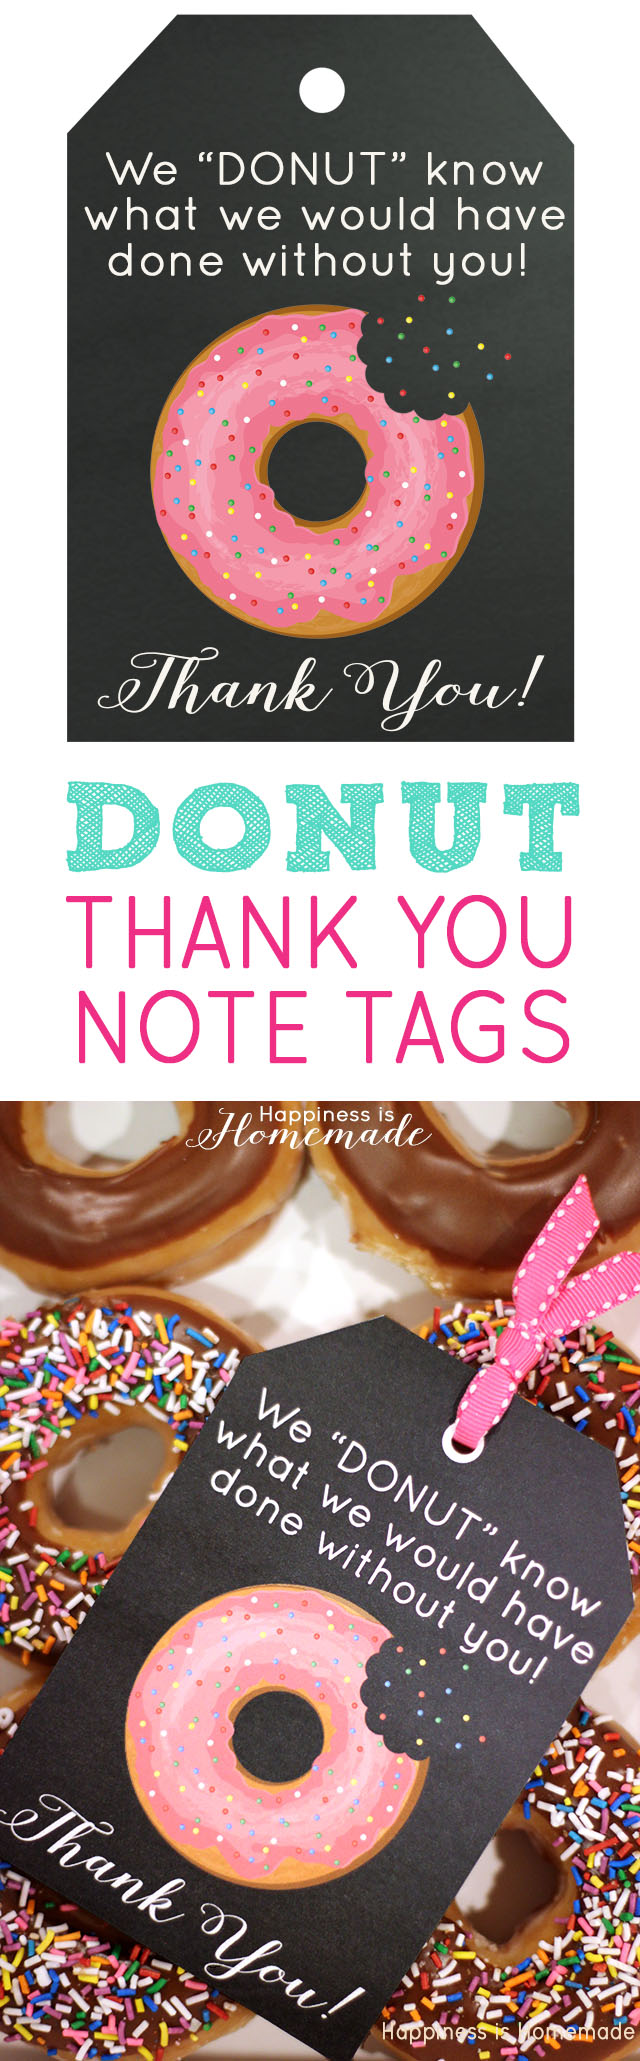 Donut-Thank-You-Note-Tags-We-Donut-Know-What-We-Would-Have-Done-Without-You